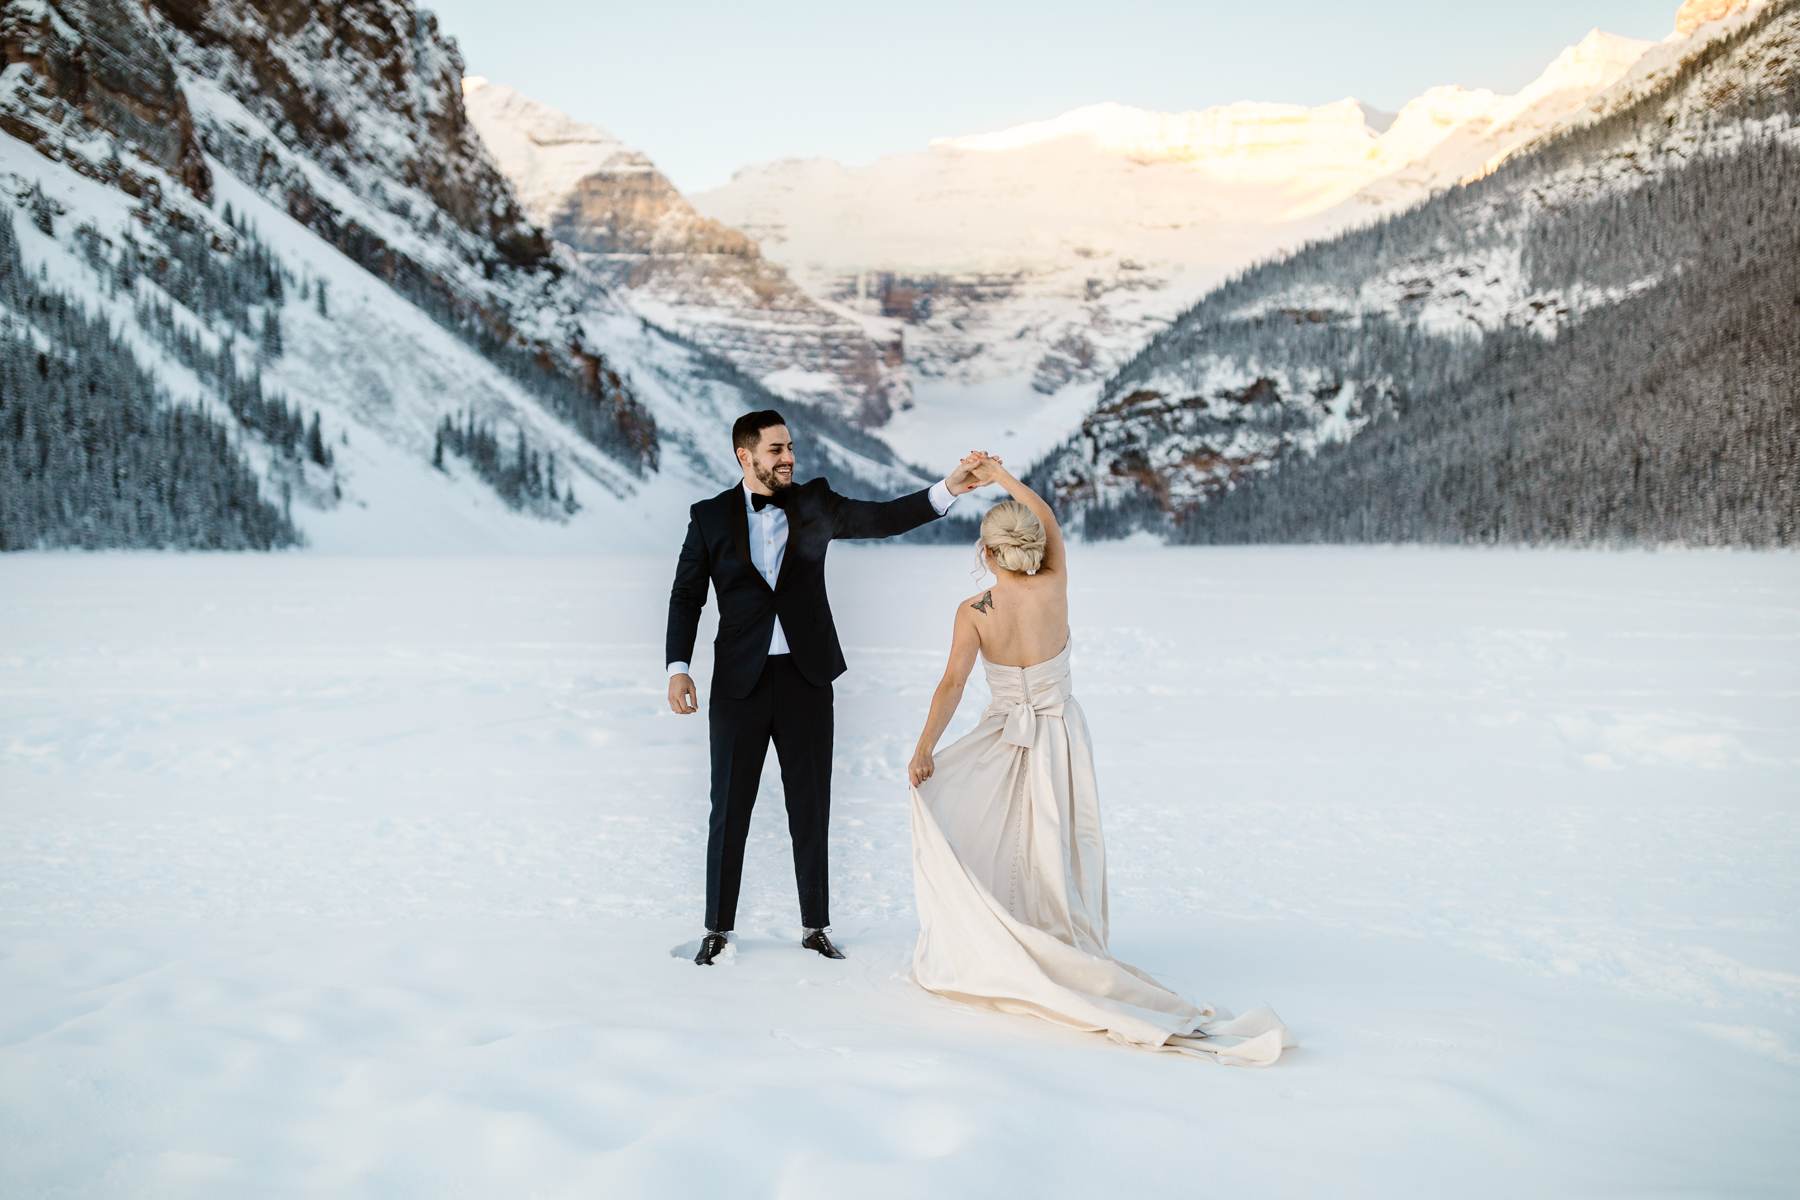 Fairmont Chateau Lake Louise Wedding Photography in Winter - Image 2